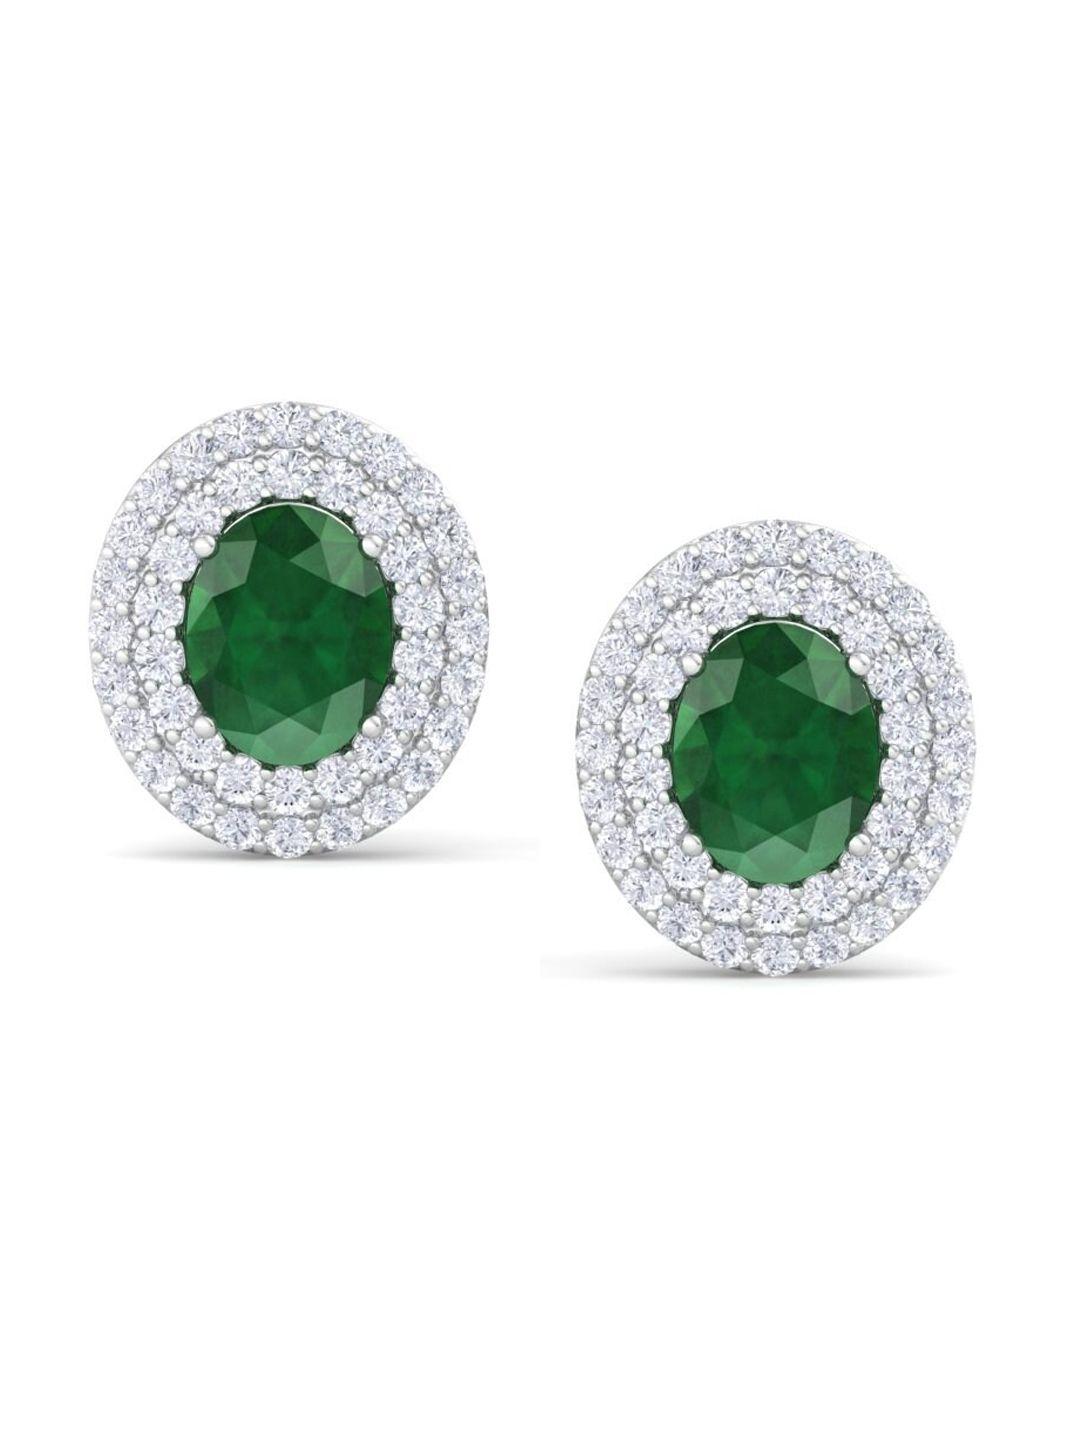 inddus jewels rhodium-plated 925 sterling silver cubic zirconia studded studs earrings